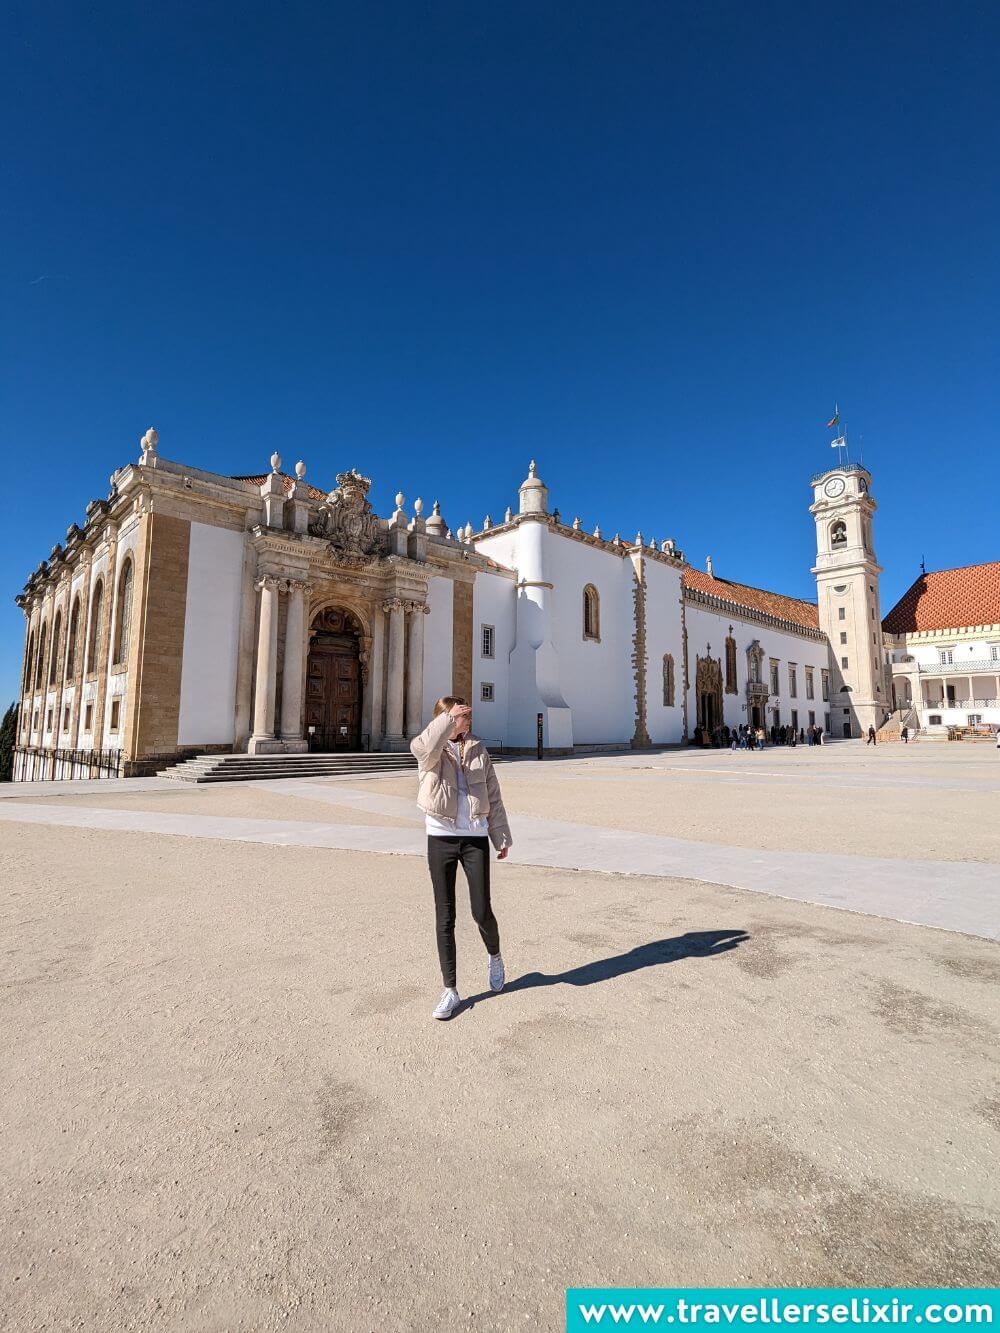 Photo of me at the University of Coimbra in Alta.